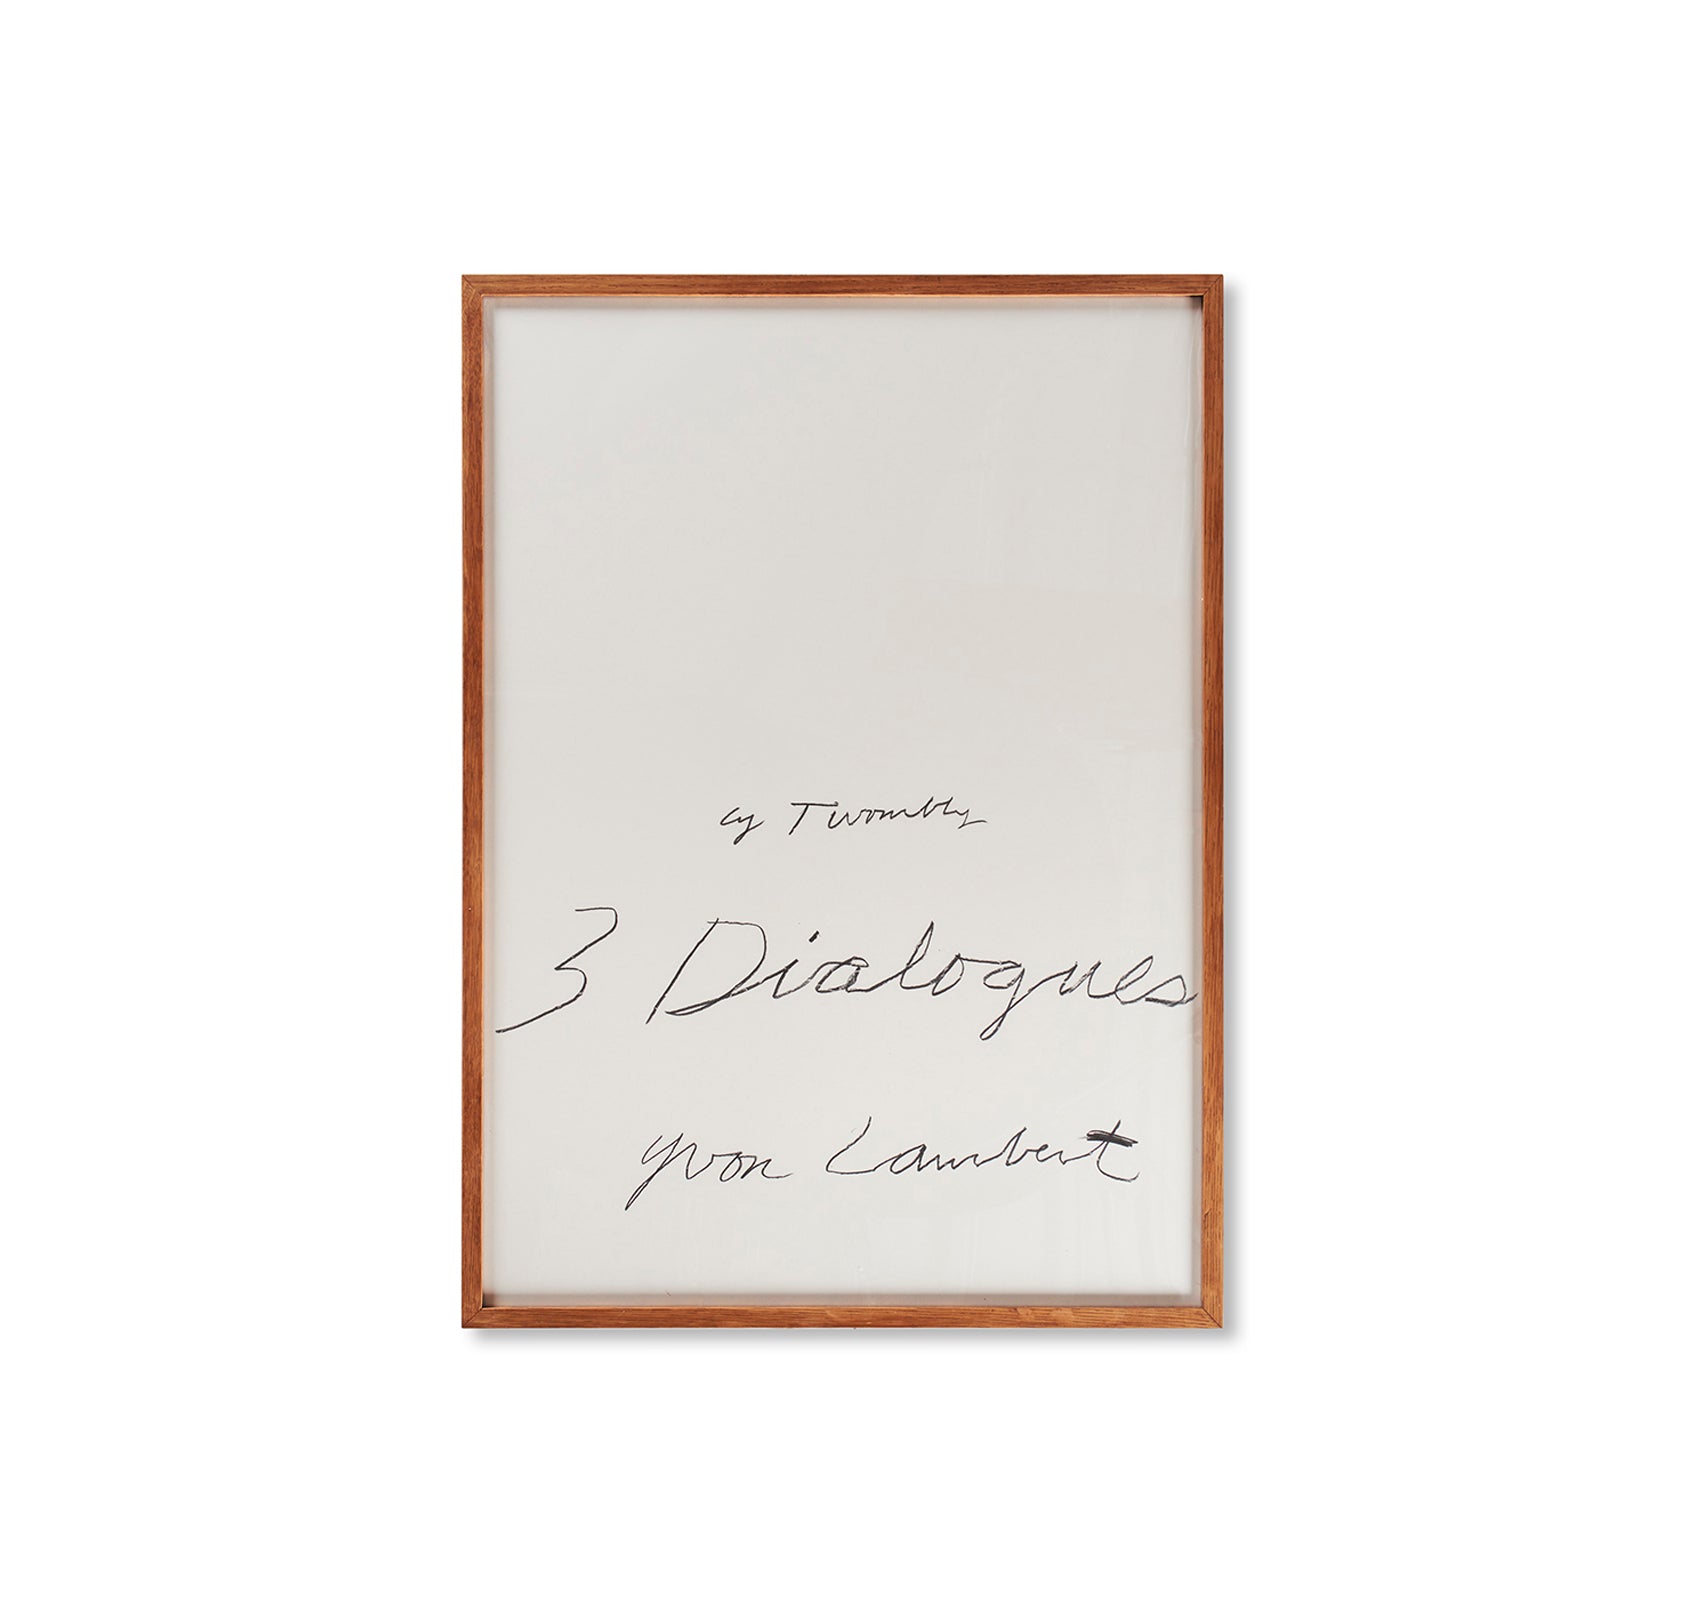 THREE DIALOGUES.1 PRINT (1977) by Cy Twombly